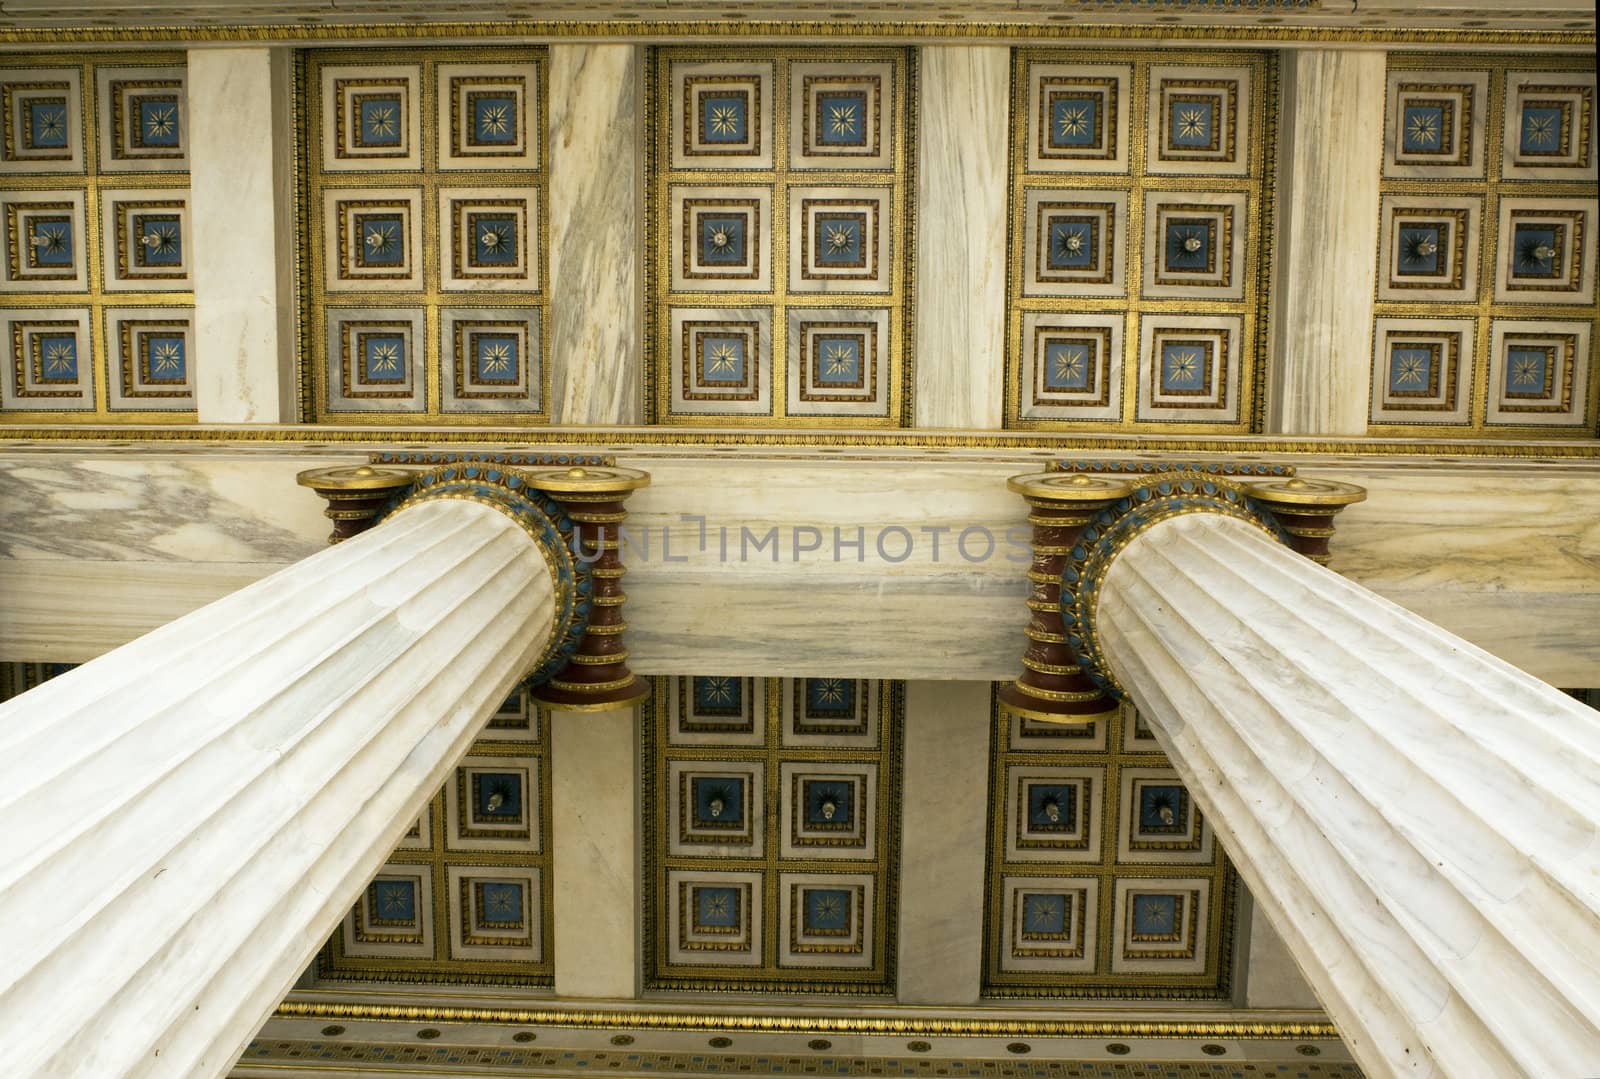 Detail of ceiling and ionic columns in Academy of Athens, Greece.